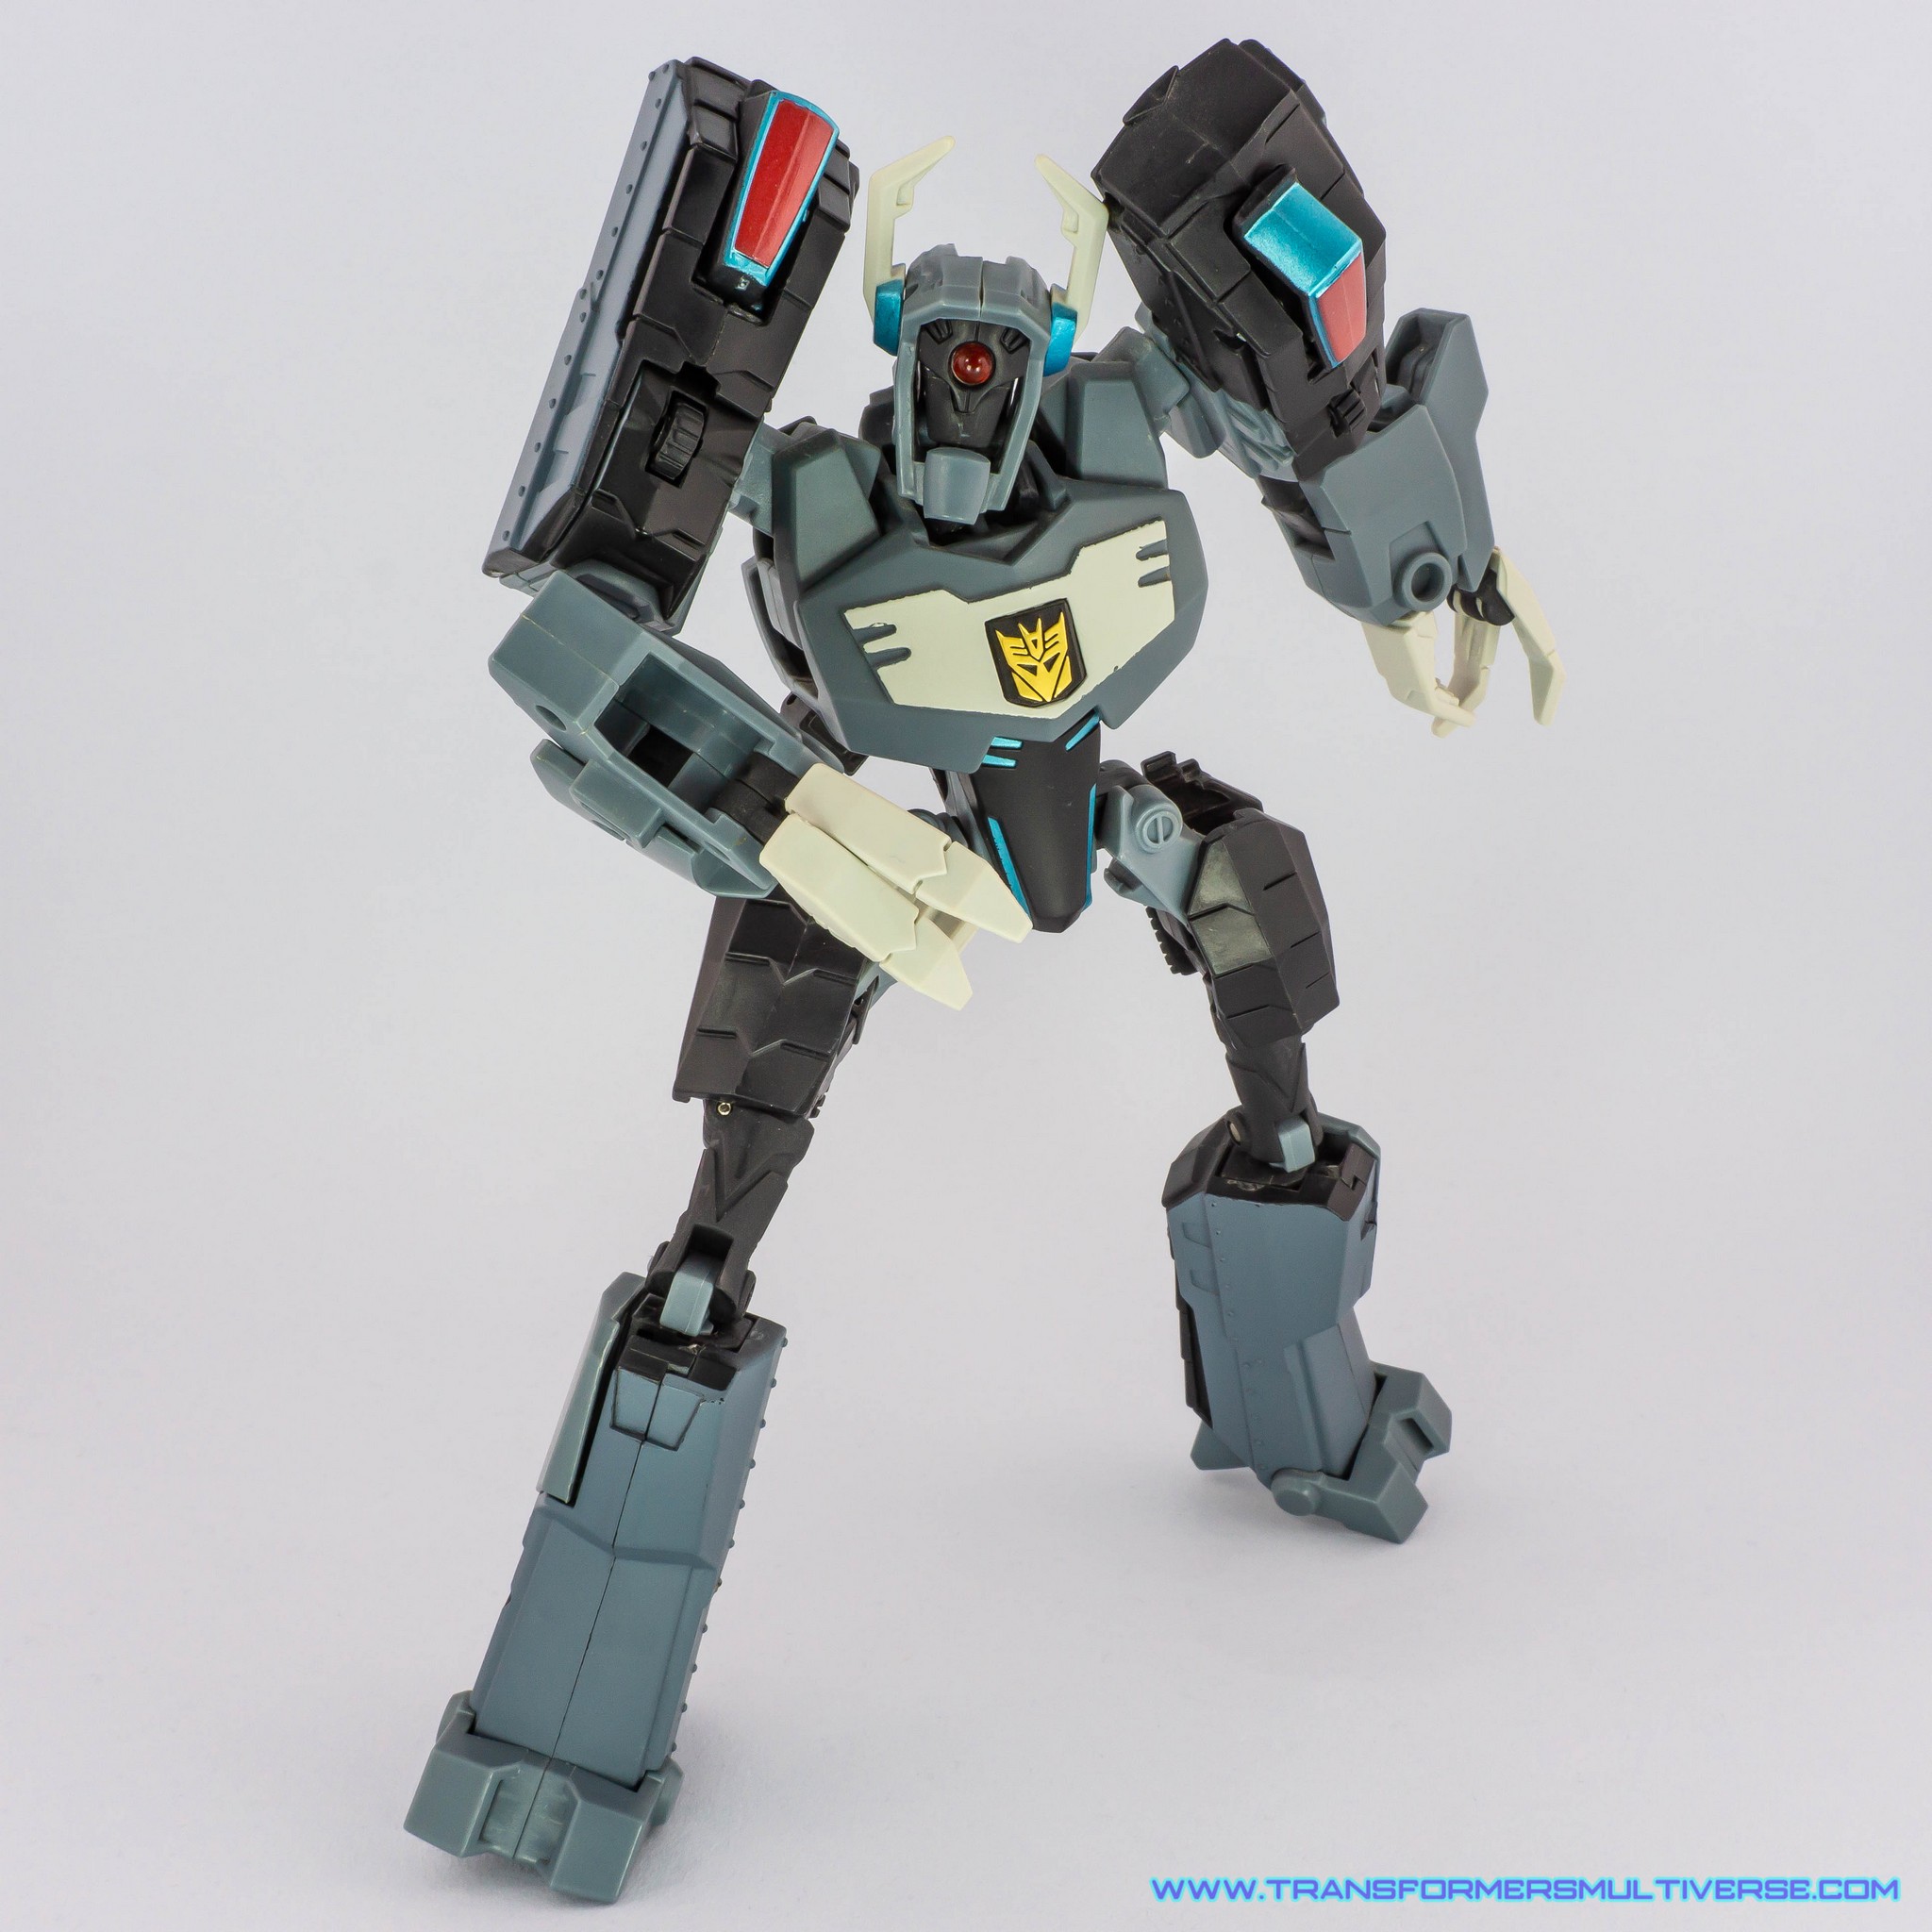 Transformers Animated Shockwave robot mode, posed